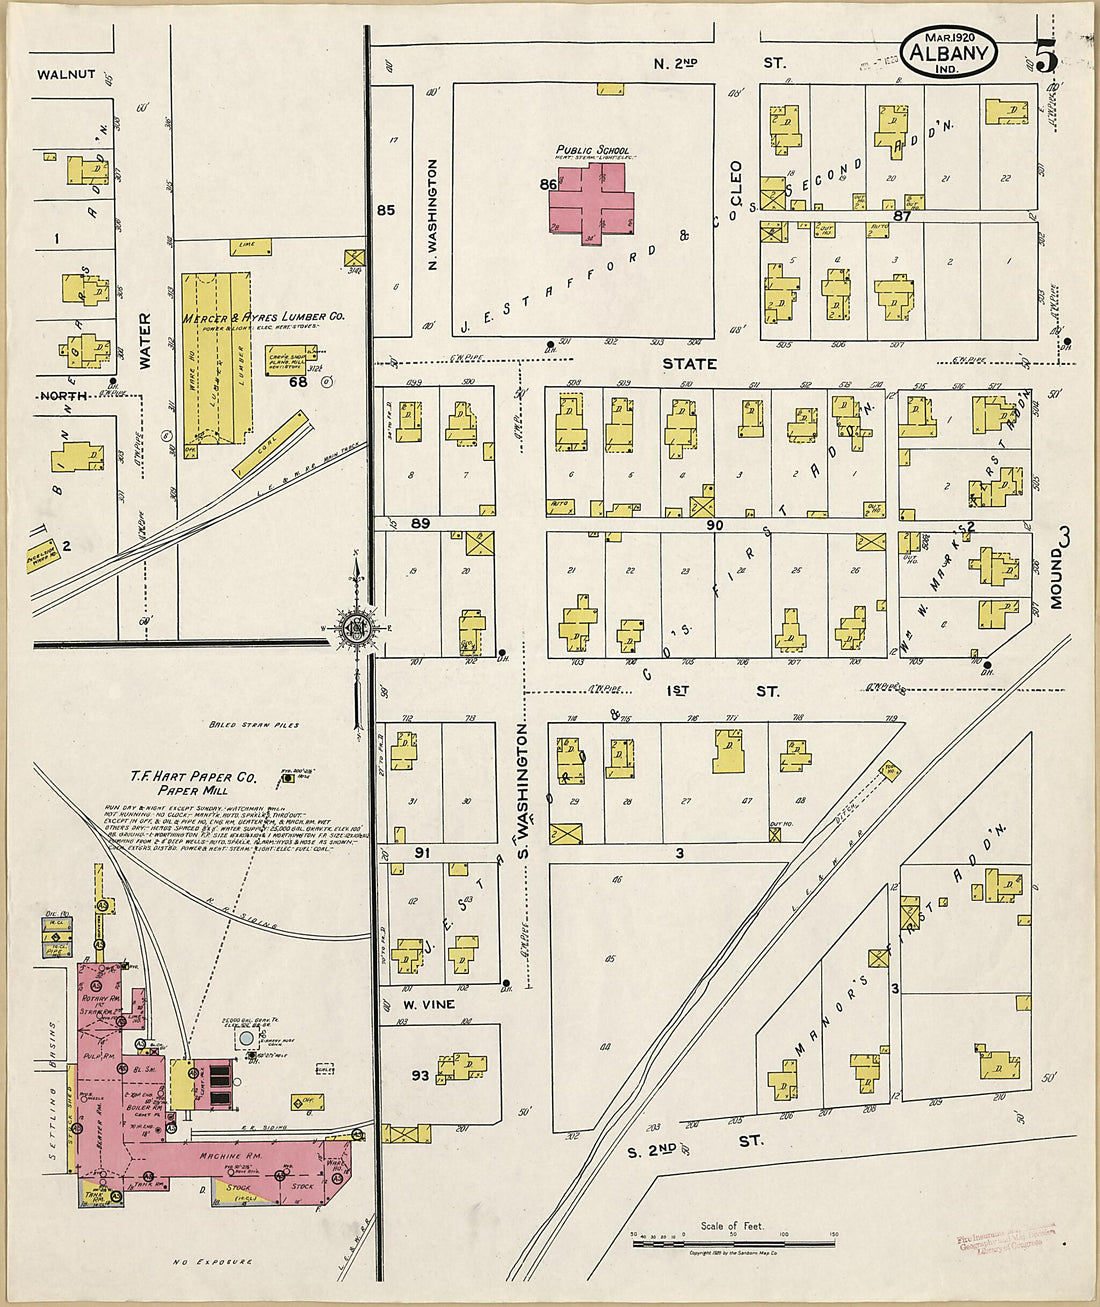 This old map of Albany, Delaware County, Indiana was created by Sanborn Map Company in 1920